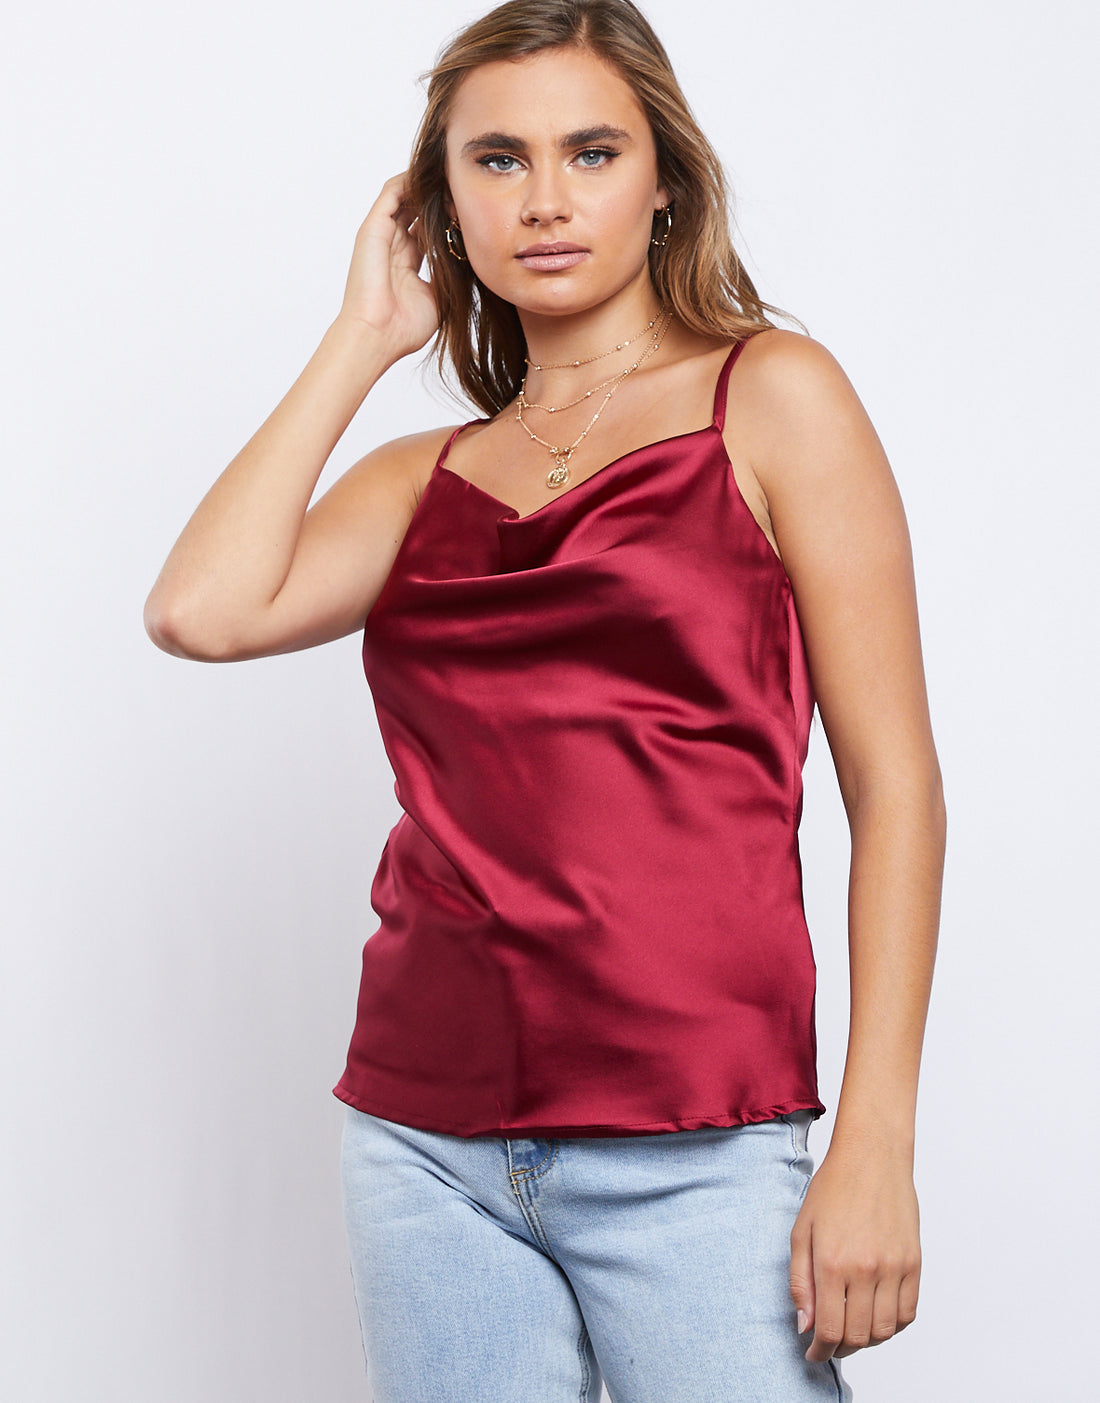 Downtown Silky Cowl Neck Cami Tops Burgundy Small -2020AVE